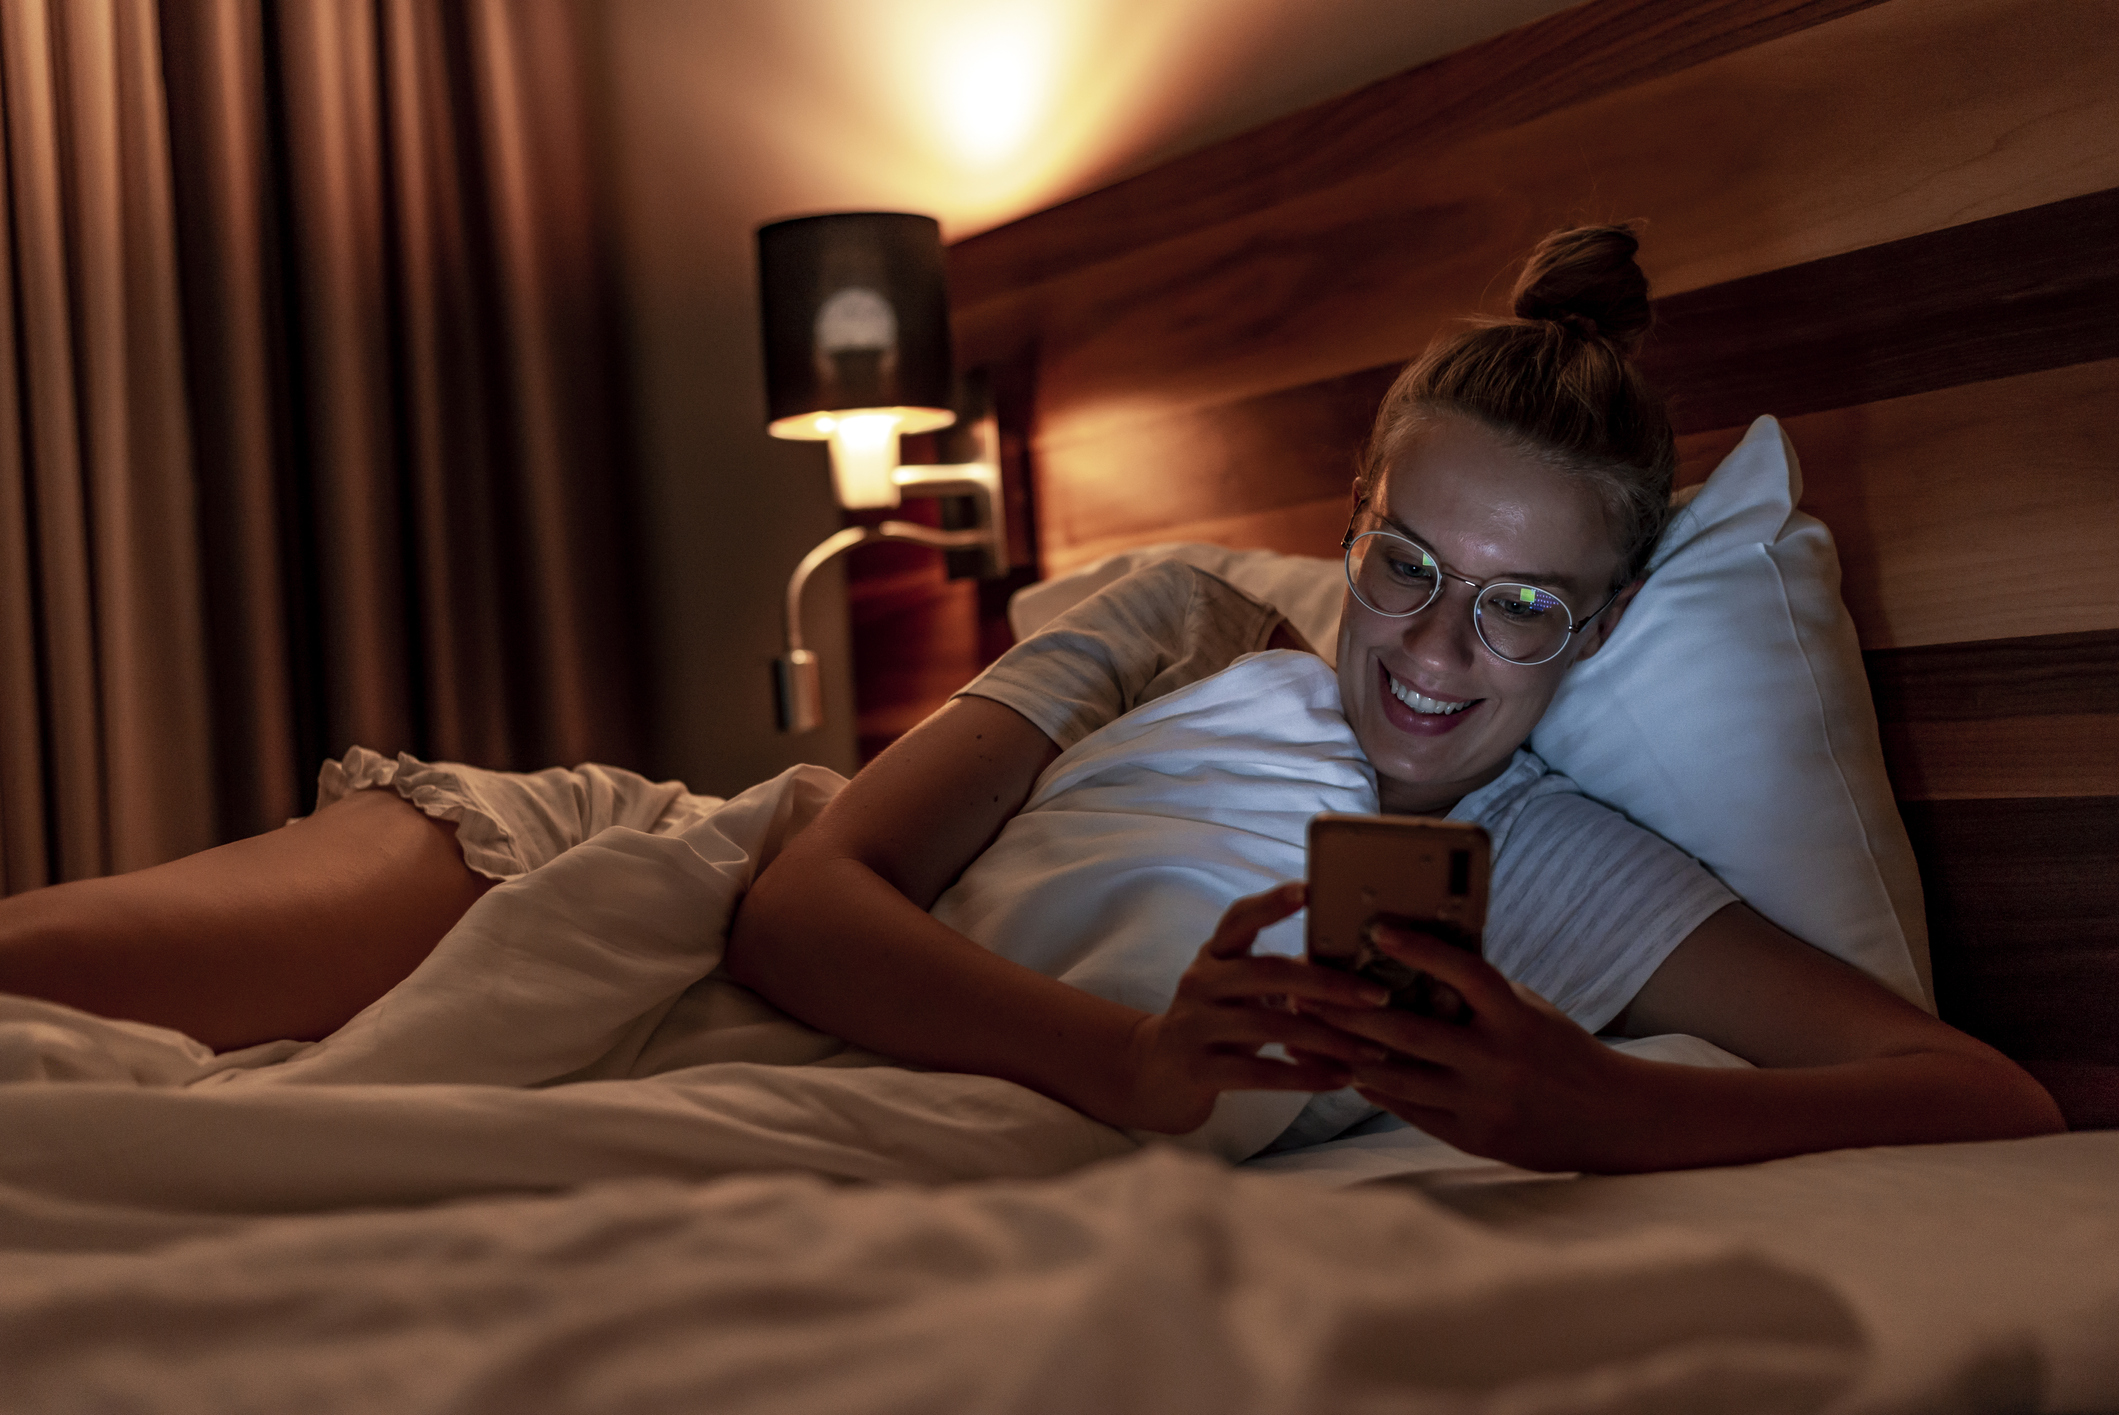 Feel Inspired With This List Of 100+ Goodnight Messages For Him And Her